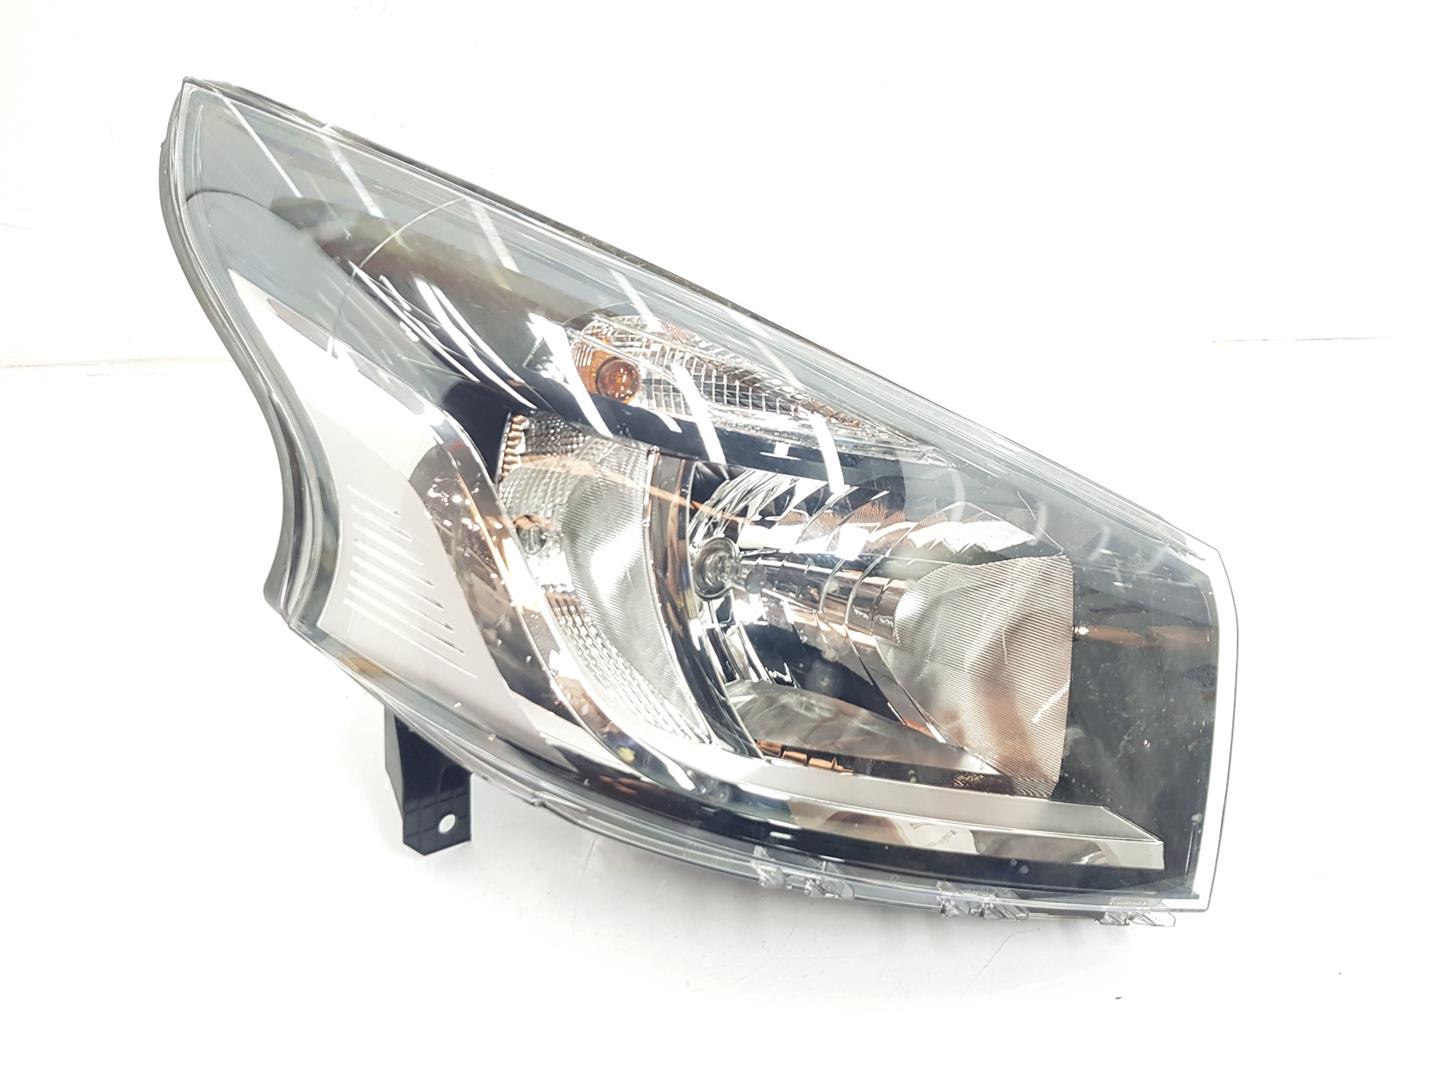 RENAULT Trafic 2 generation (2001-2015) Front Right Headlight 260109424R, 1EE011410-22, 2222DL 19890716